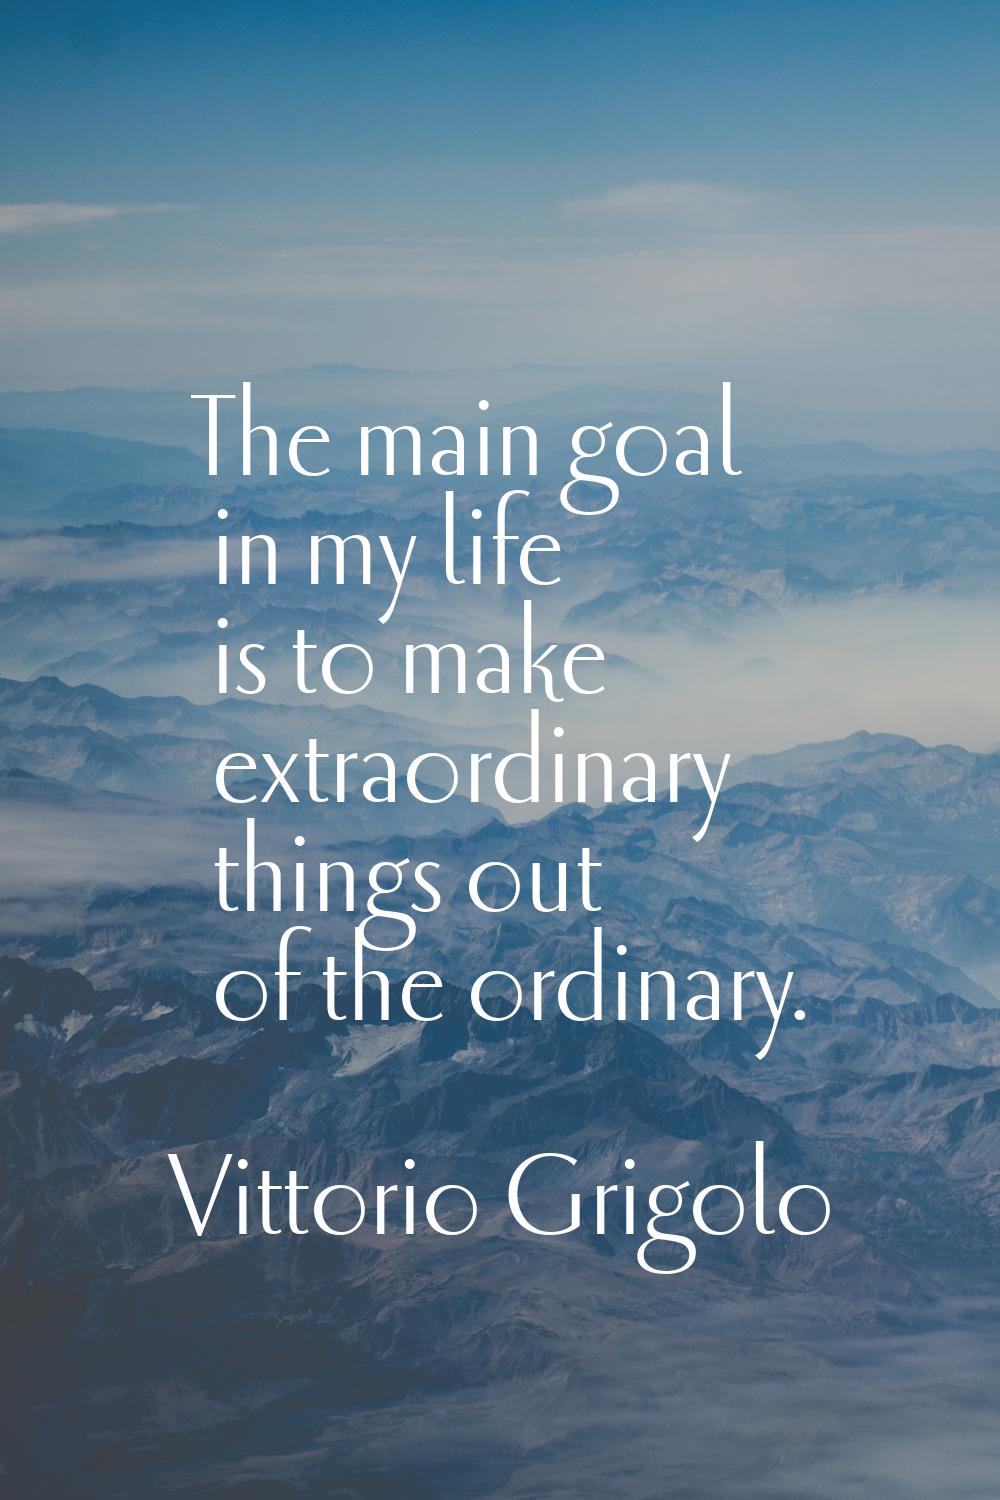 The main goal in my life is to make extraordinary things out of the ordinary.